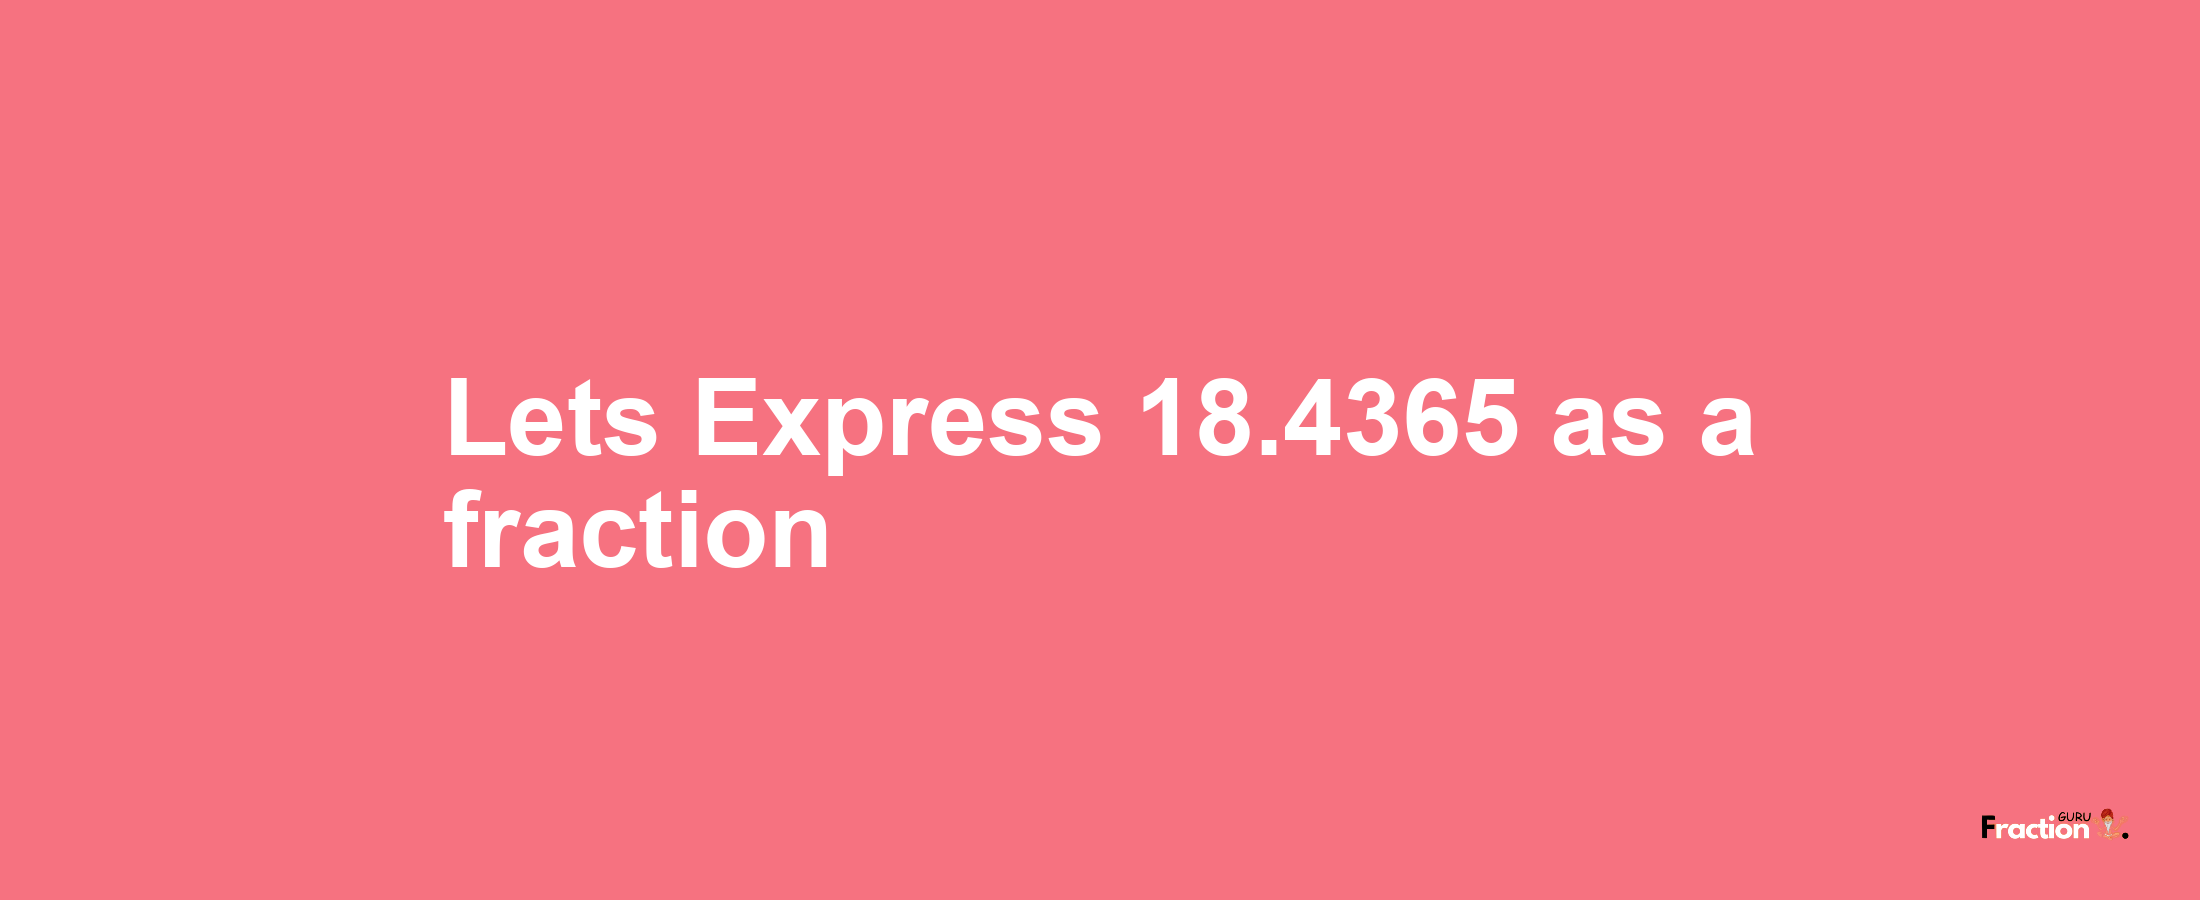 Lets Express 18.4365 as afraction